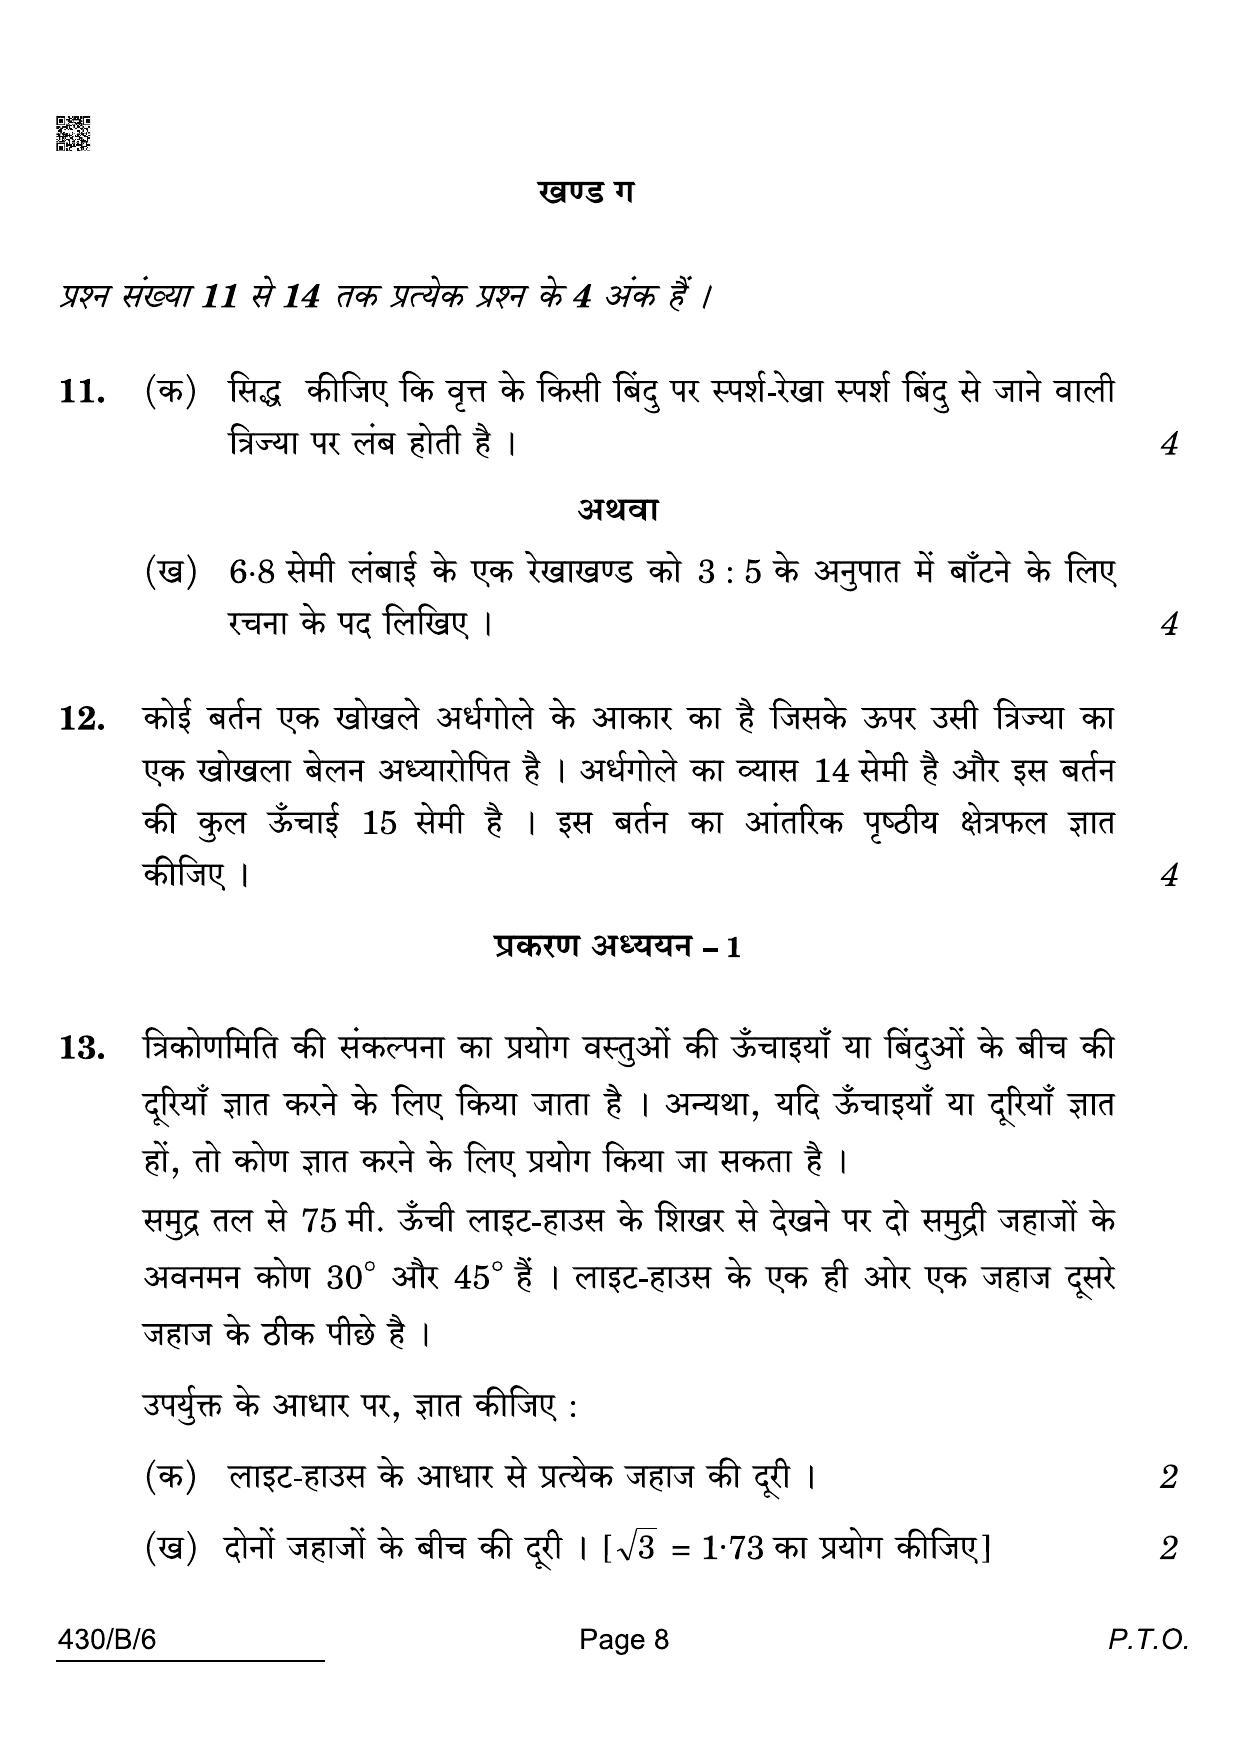 CBSE Class 10 430-B-6 Maths Basic Blind 2022 Compartment Question Paper - Page 8